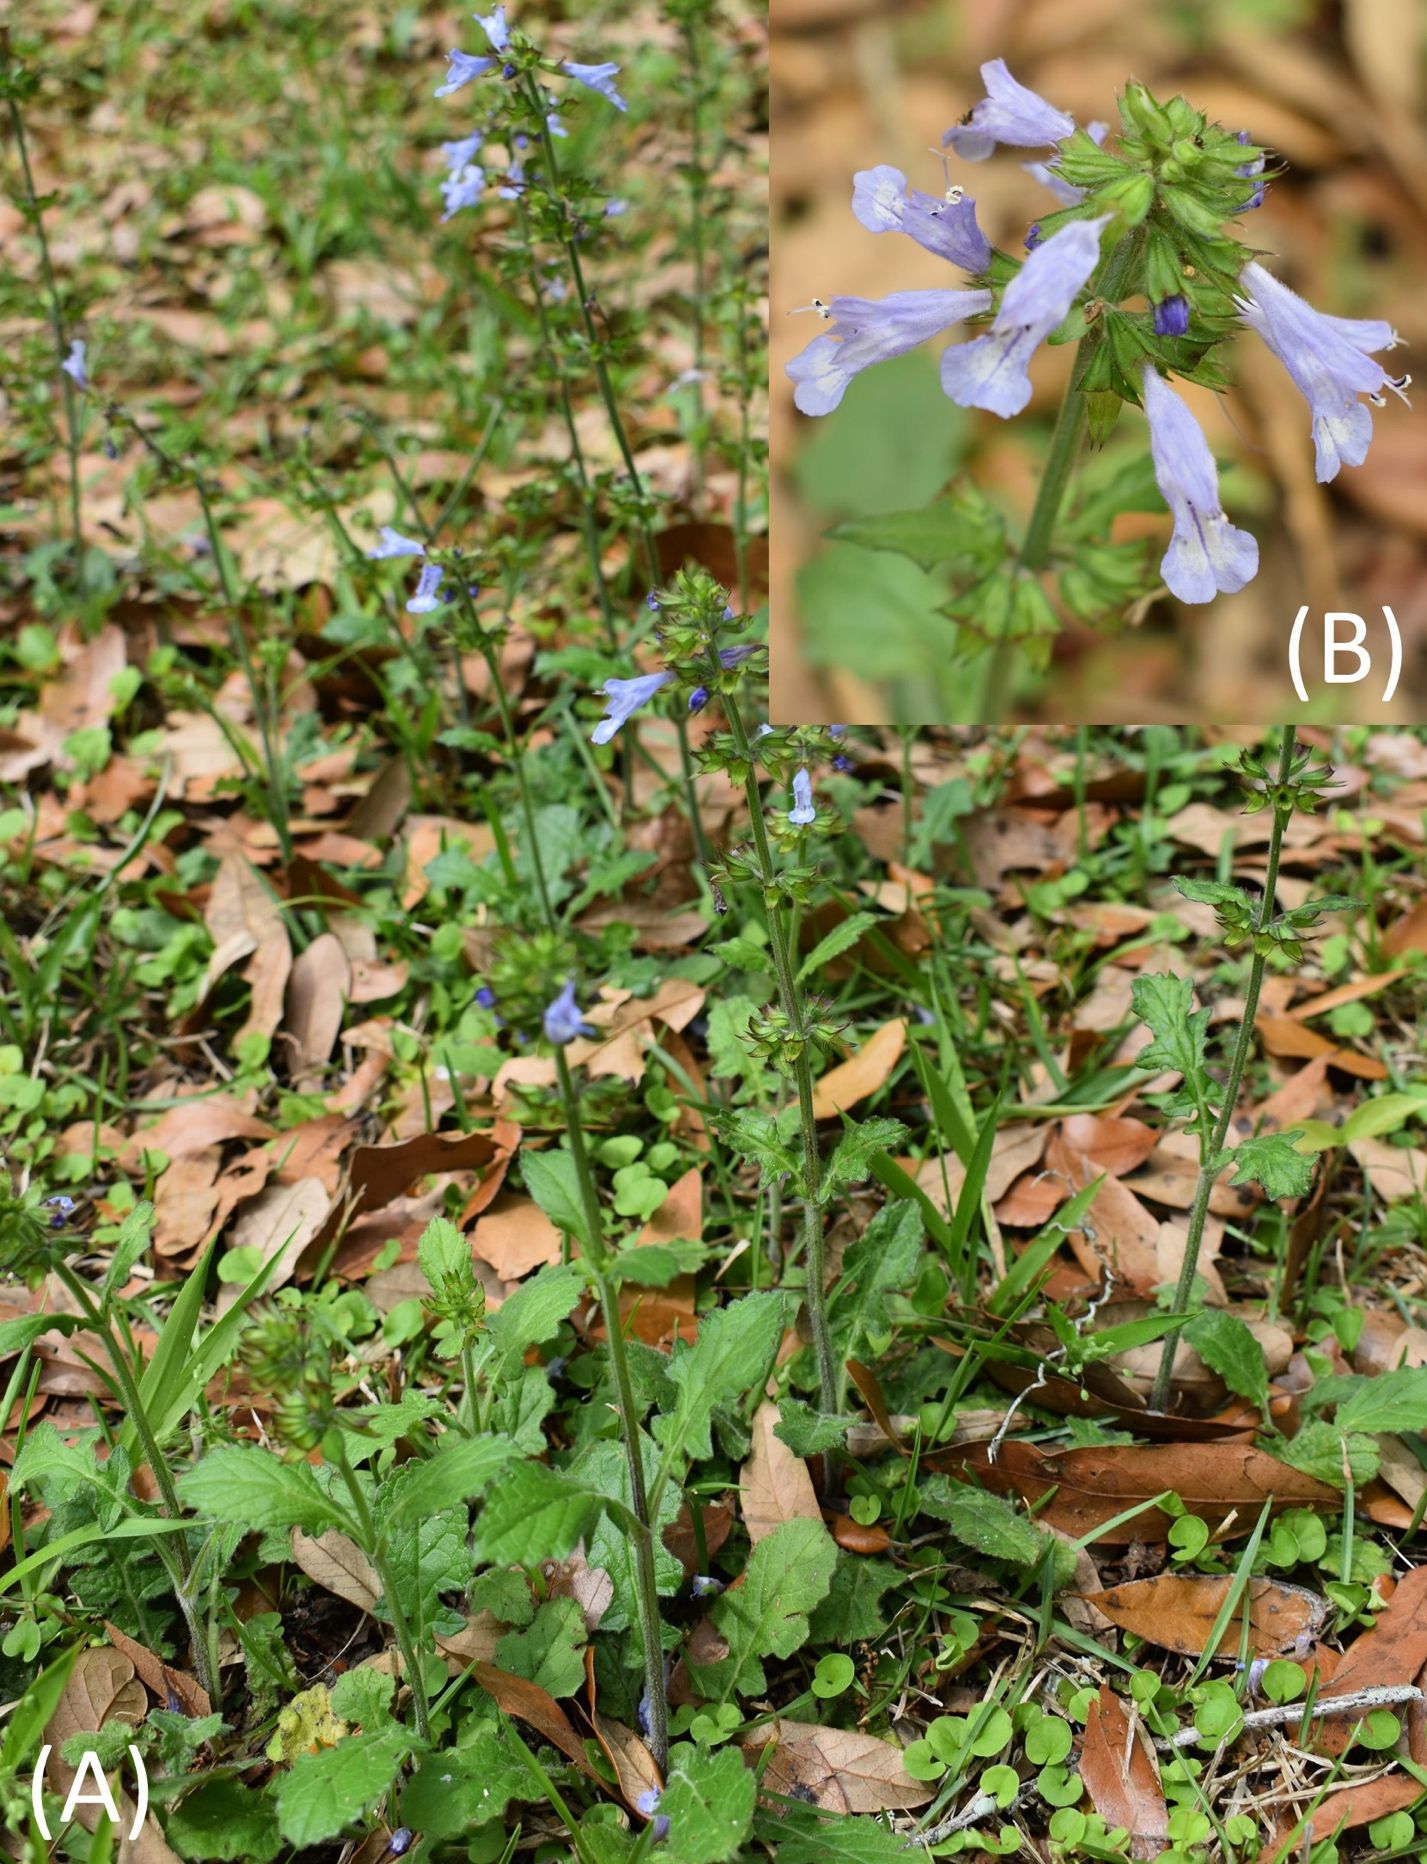 Salvia lyrata in Gainesville, Florida, (A) growing in a lawn, (B) flowers.